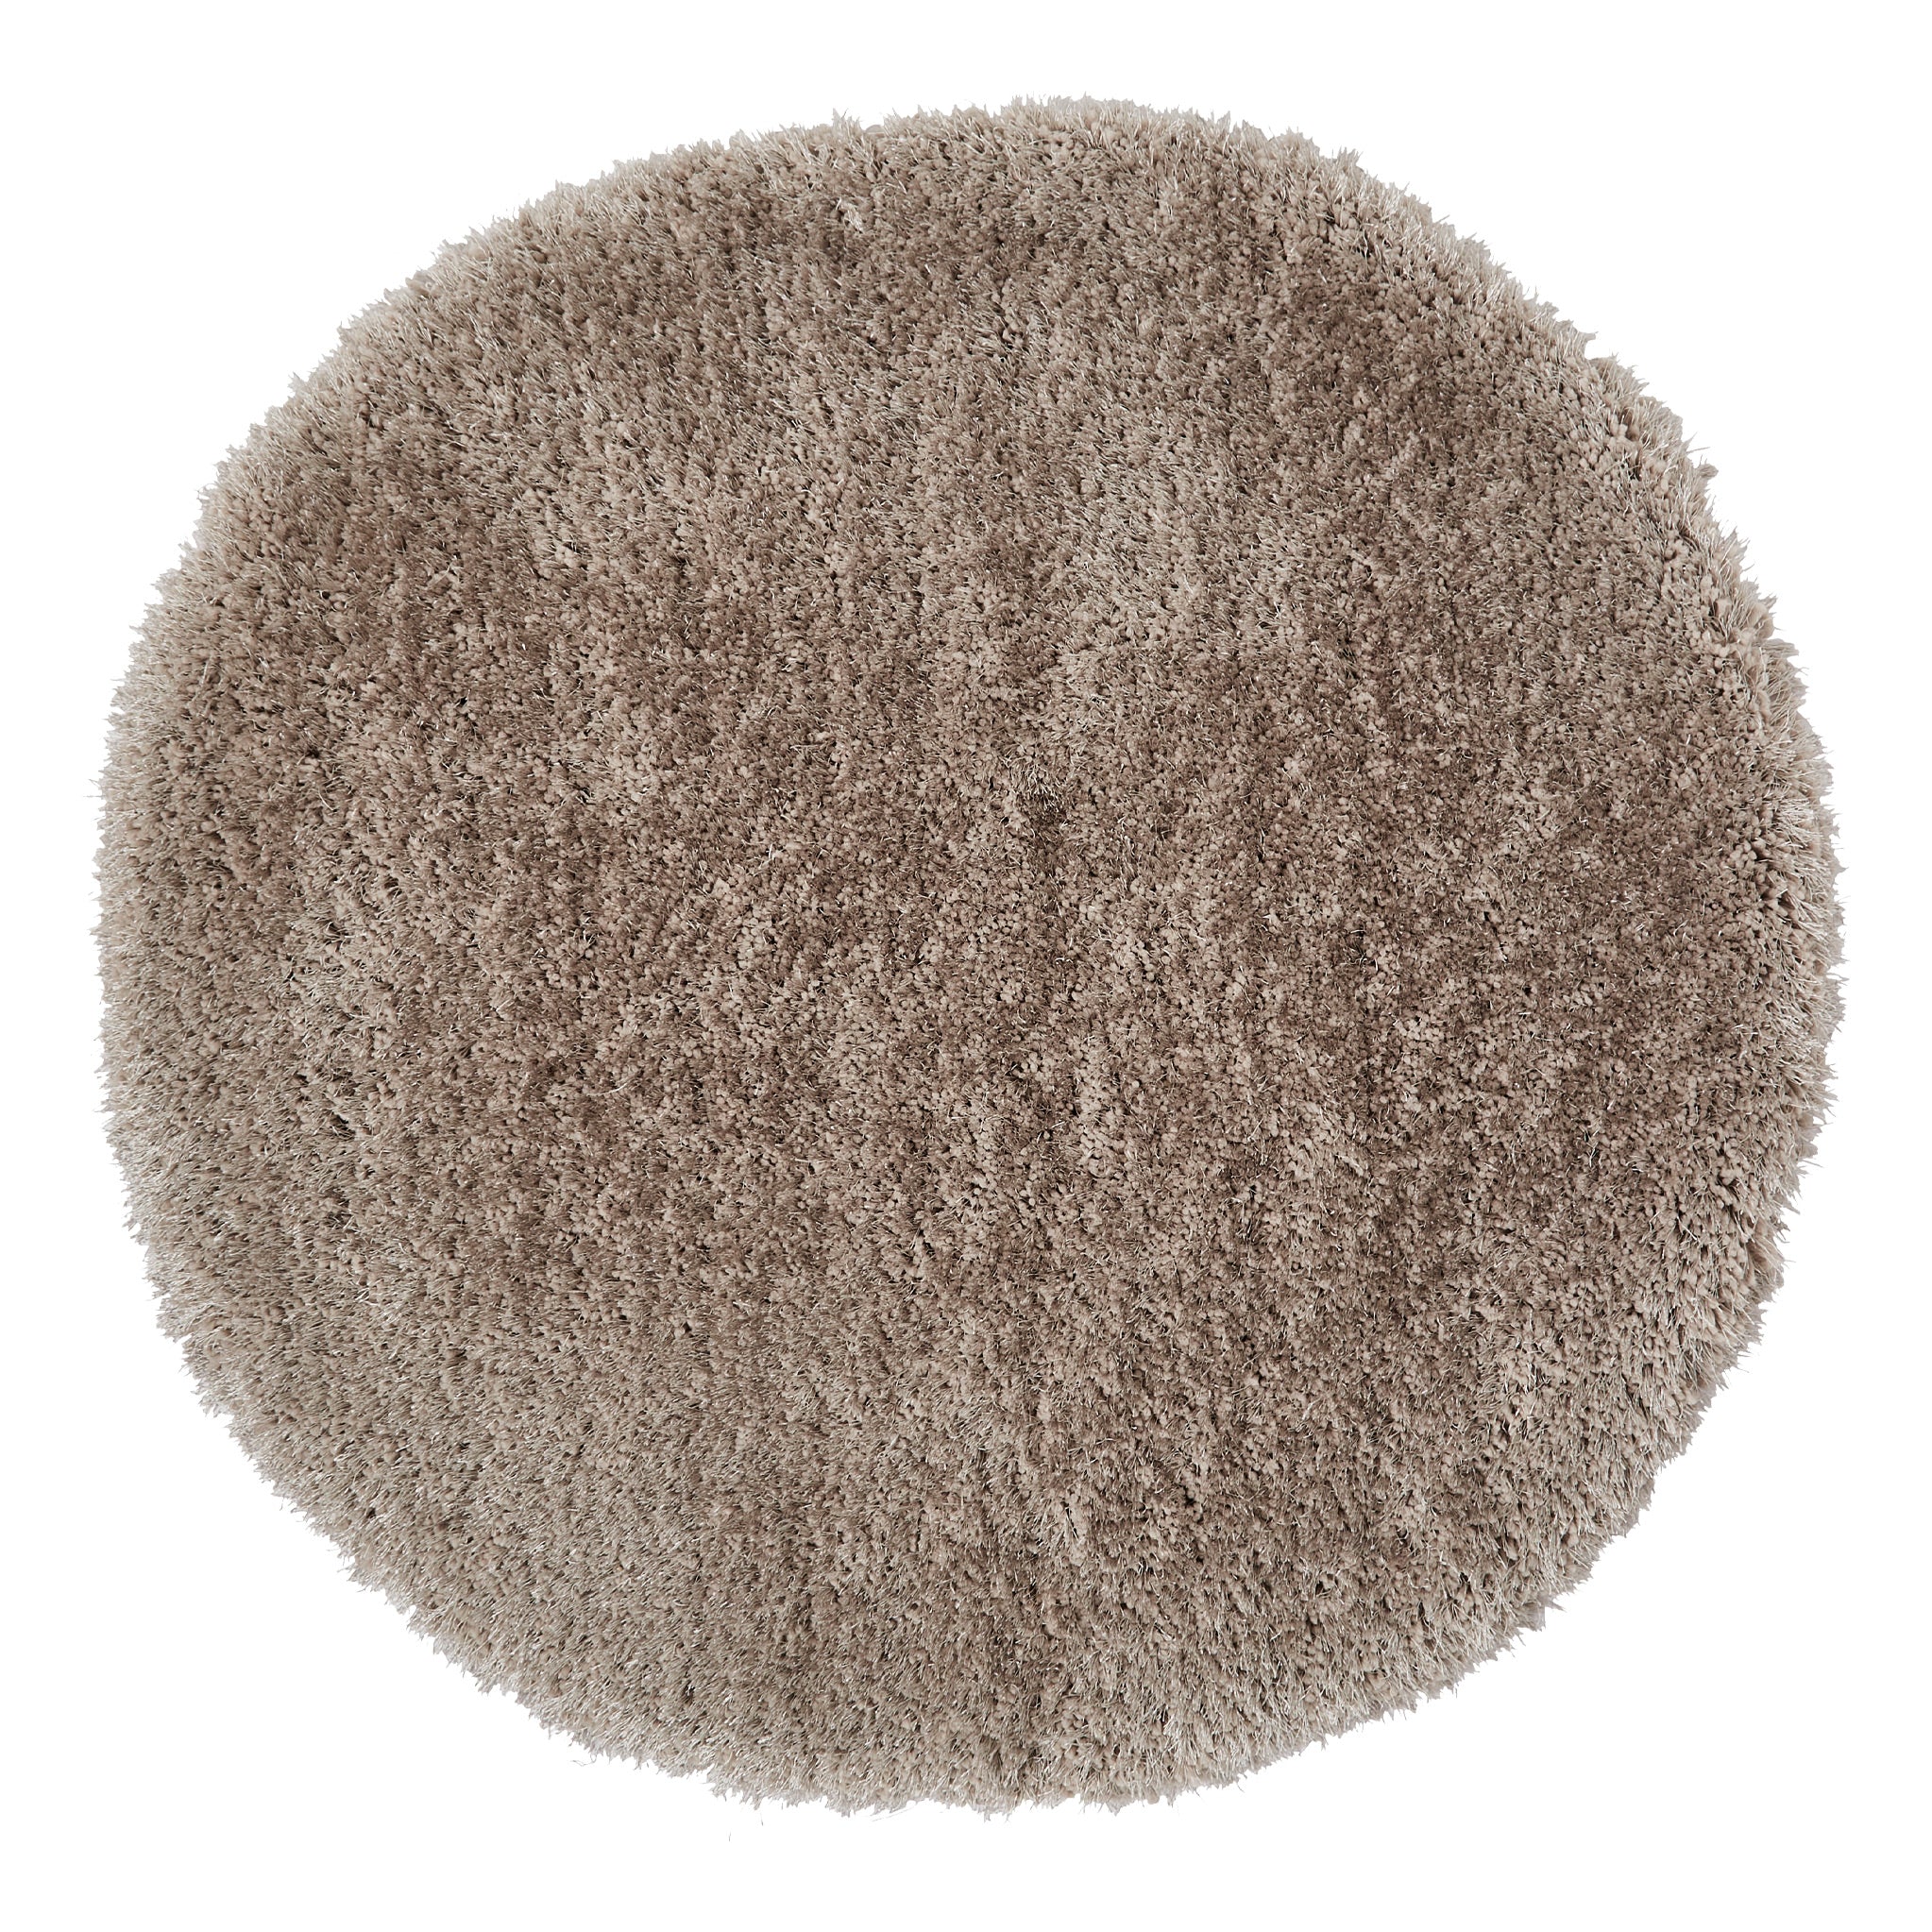 Newton Deluxe Shaggy Circular Rug For Living Room Or Bedroom